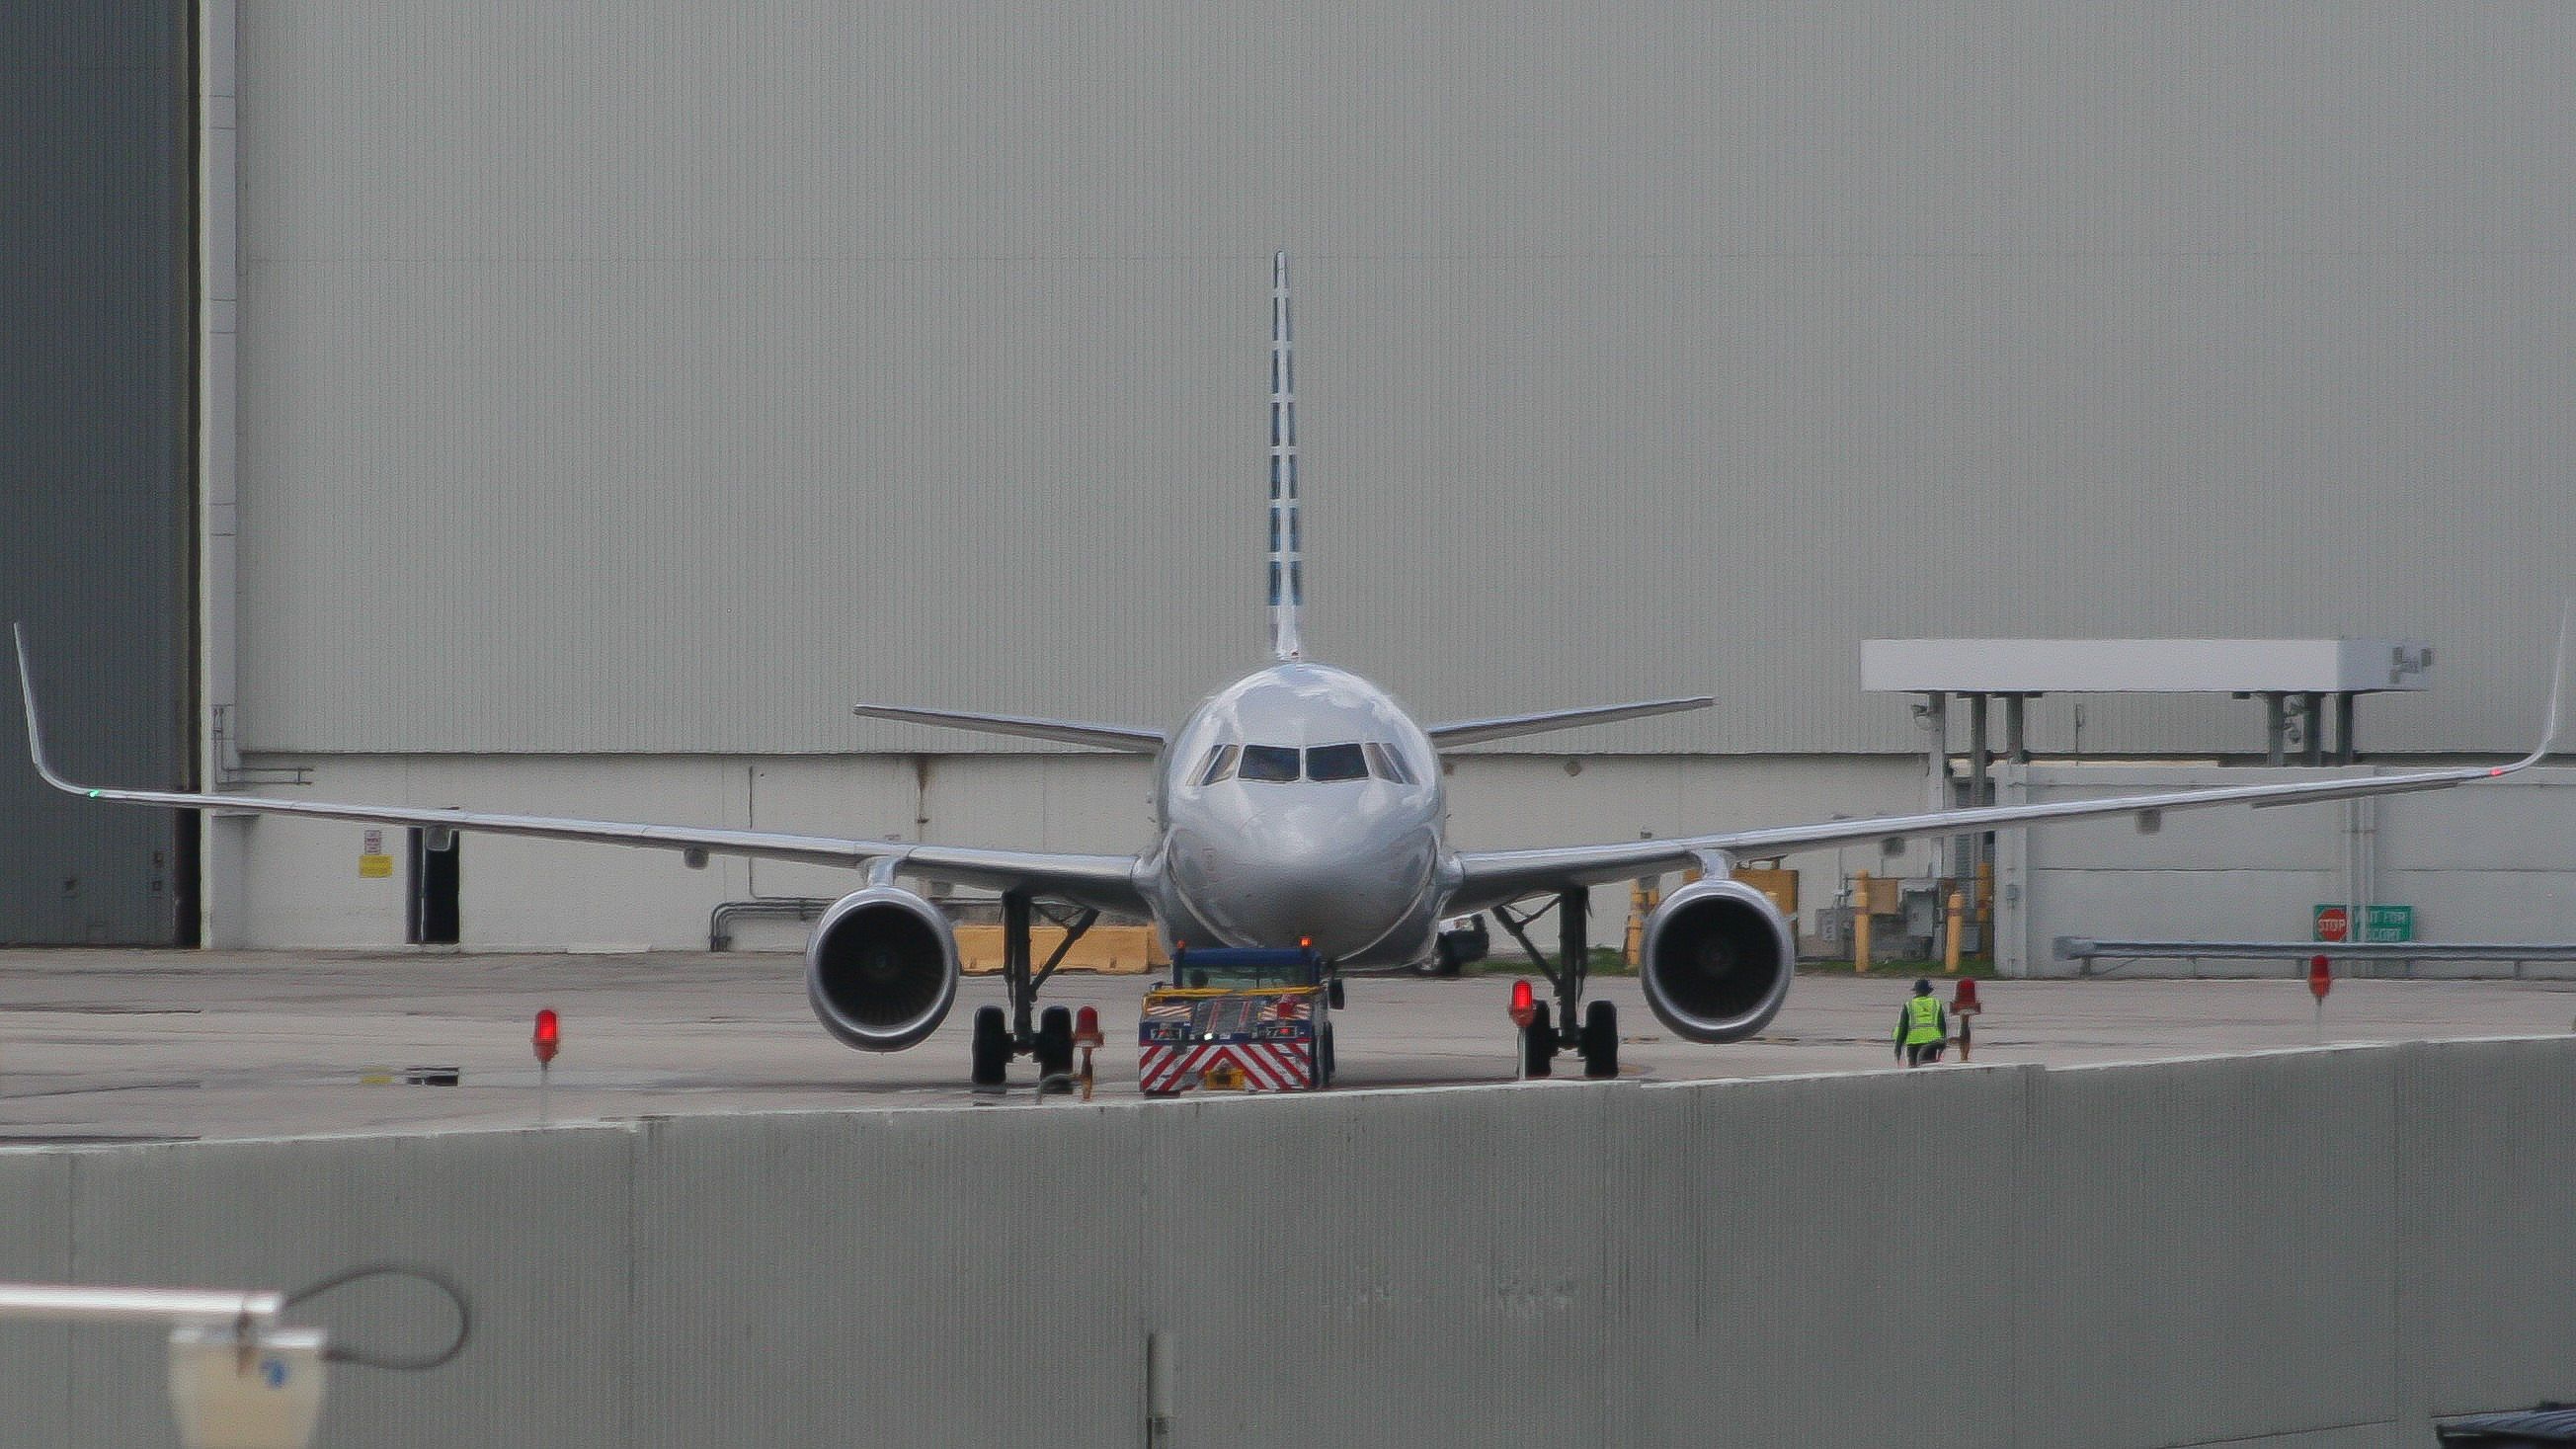 Airbus A319 (N70020) - Head on. Taken from the drop off area near Concourse D.